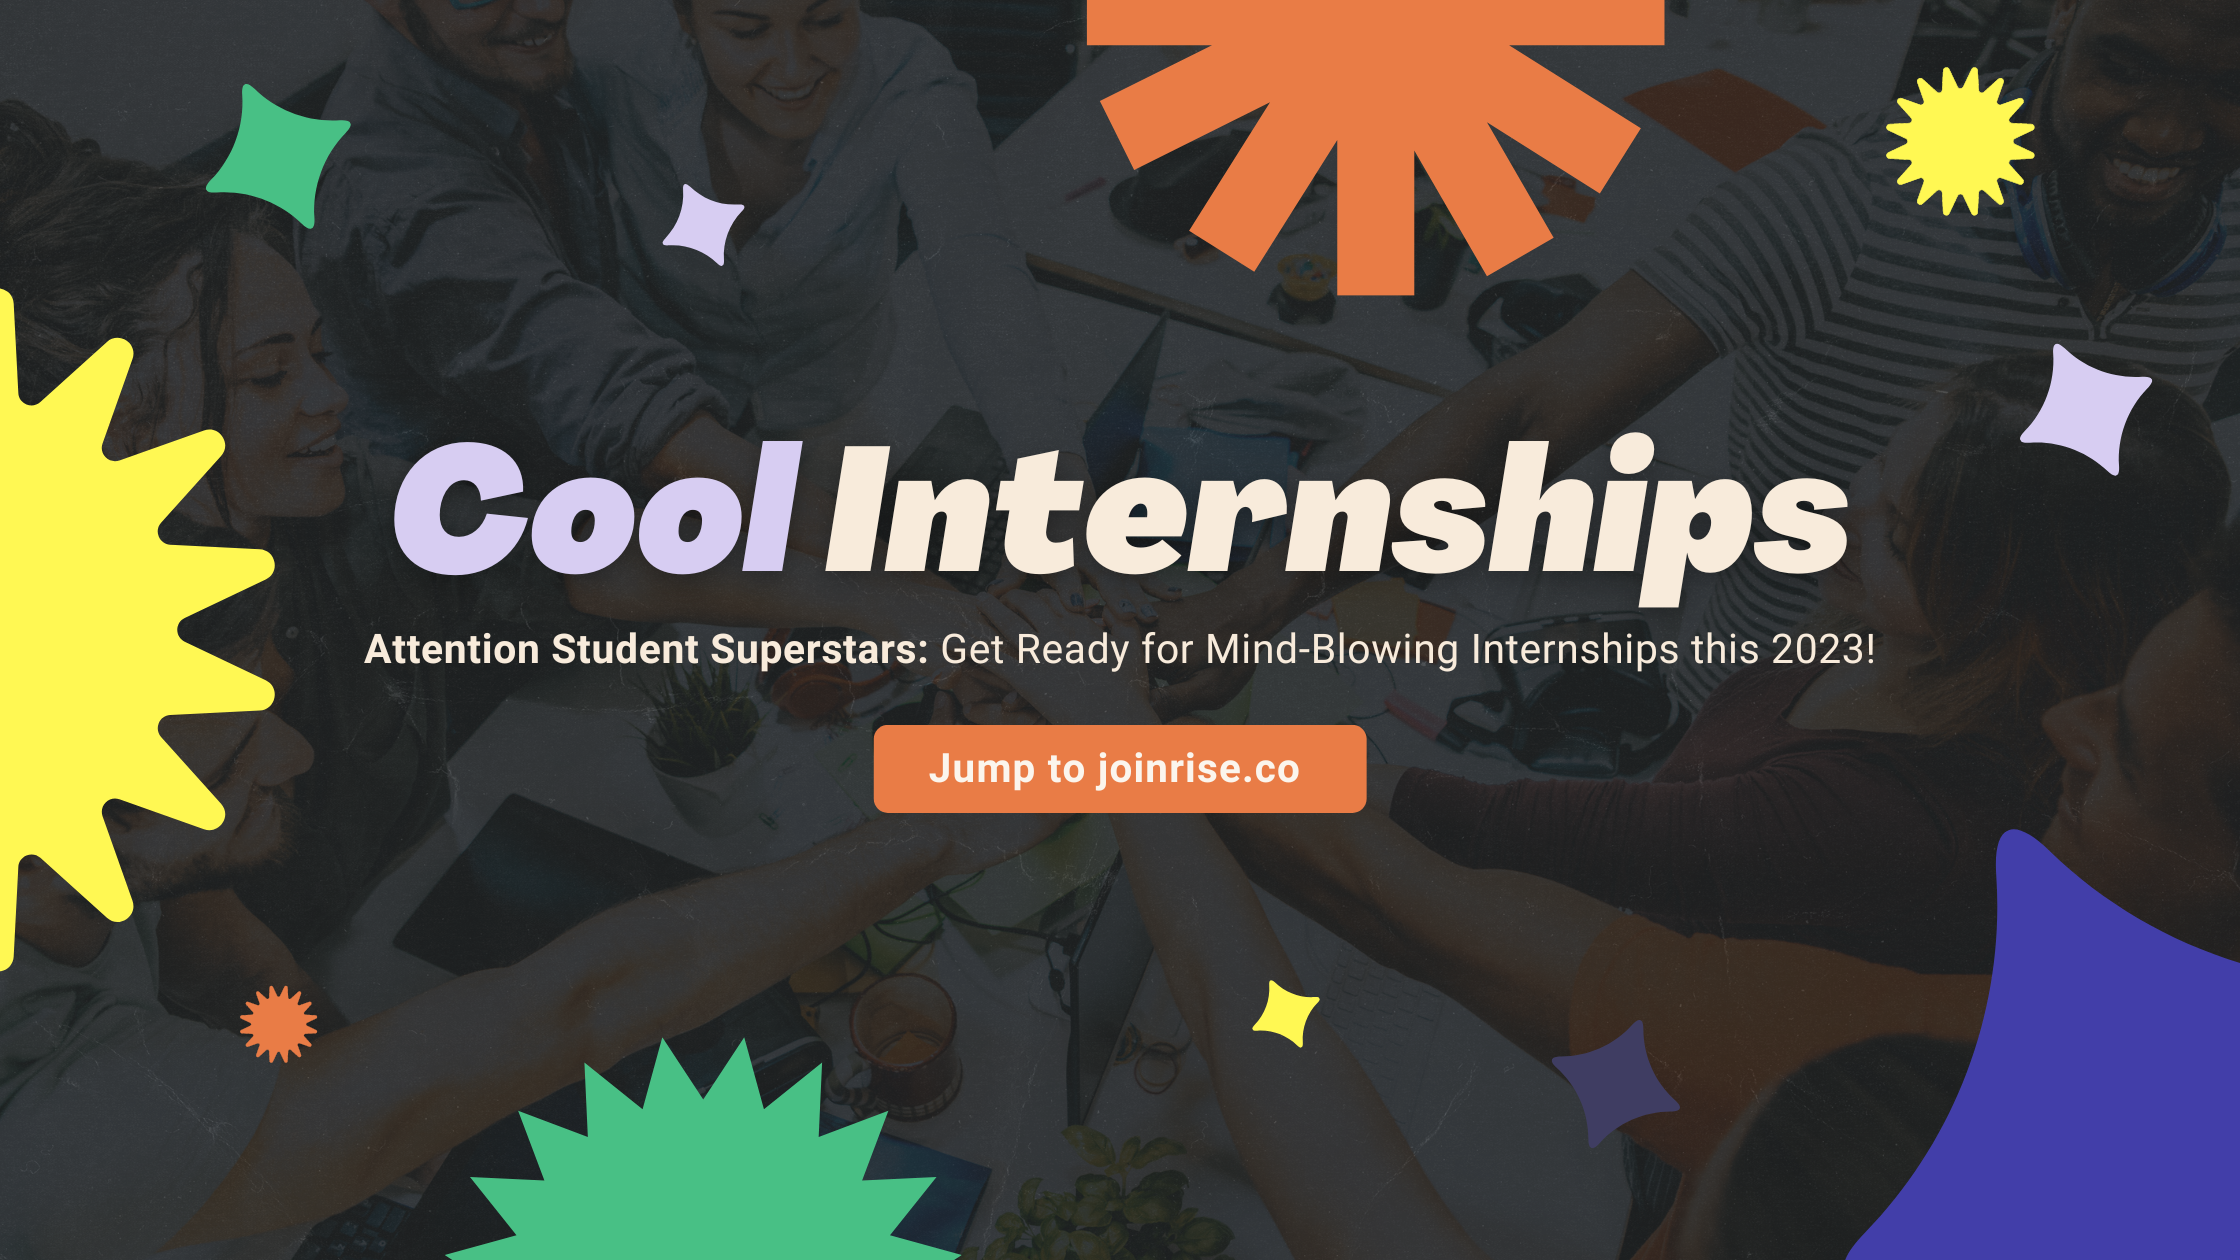 Cool internships text in a dark background with confetti